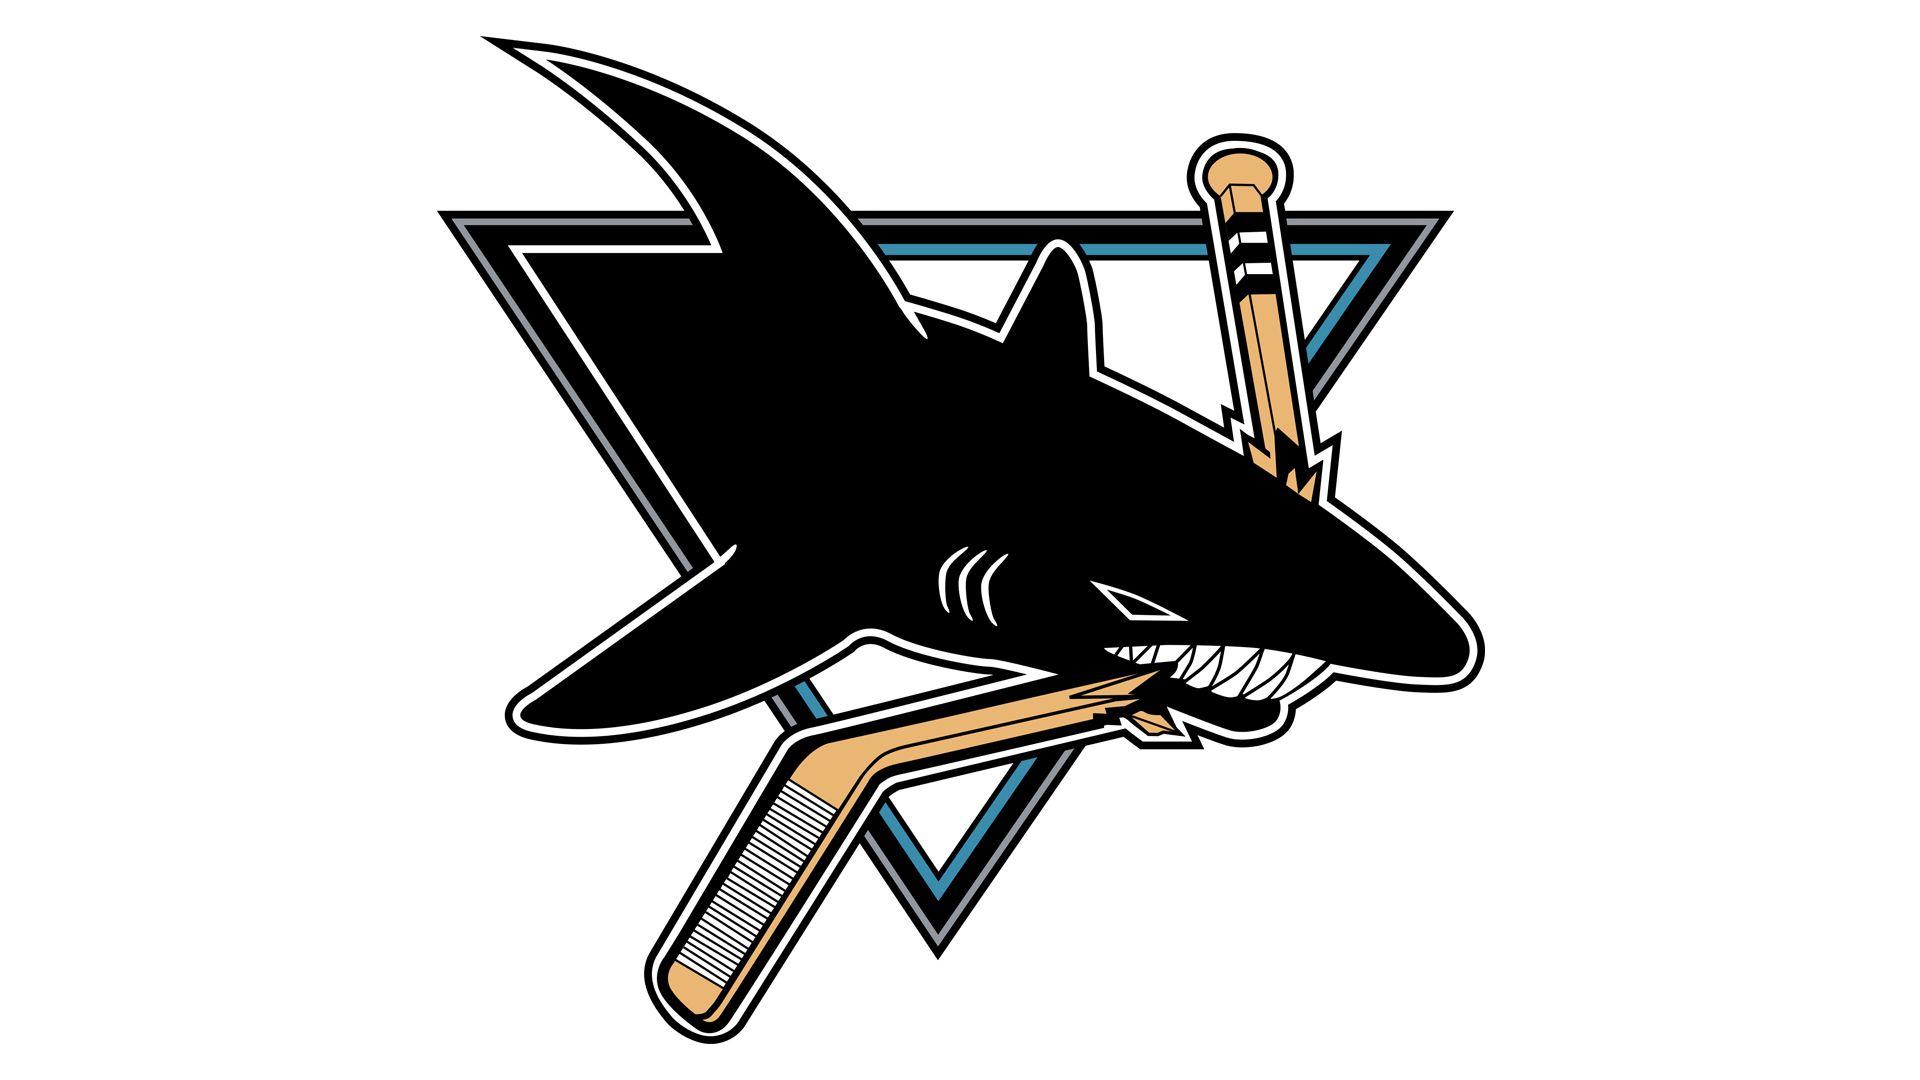 San Jose Sharks Logo - San Jose Sharks Logo, San Jose Sharks Symbol, Meaning, History